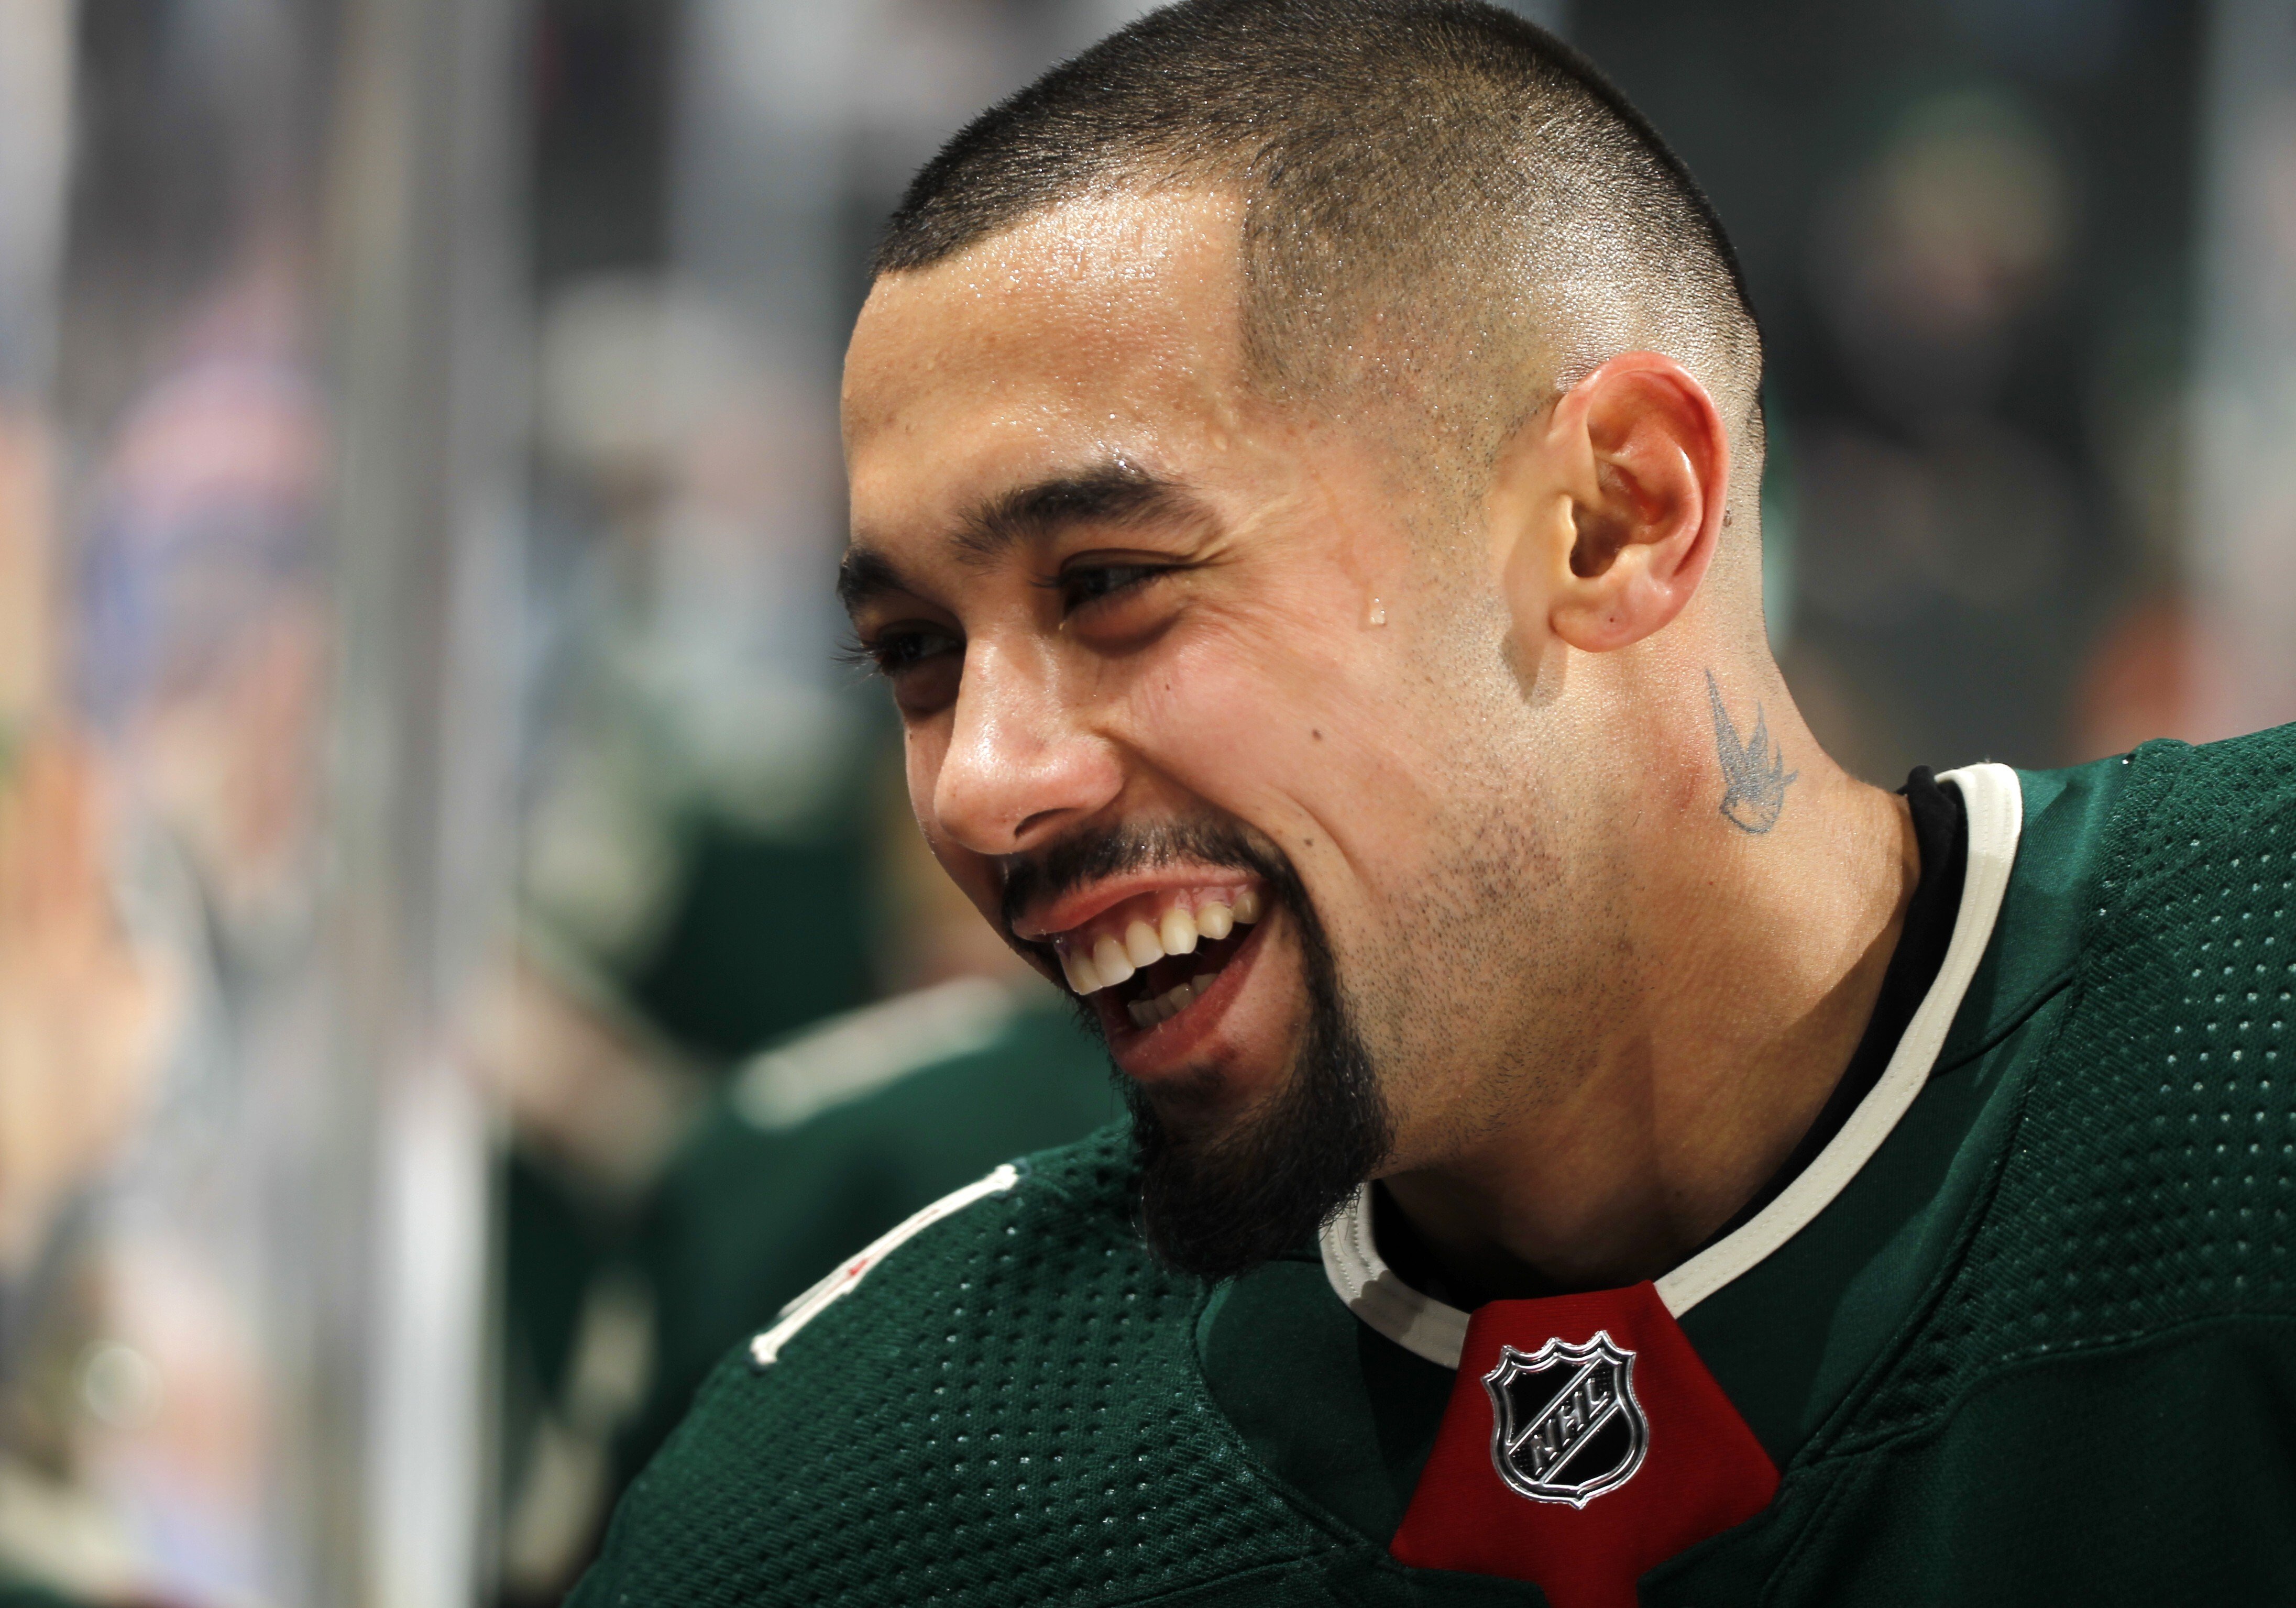 Matt Dumba has embraced his role as a non-traditional looking hockey player as the game expands diversity wise. Photo: Bruce Kluckhohn